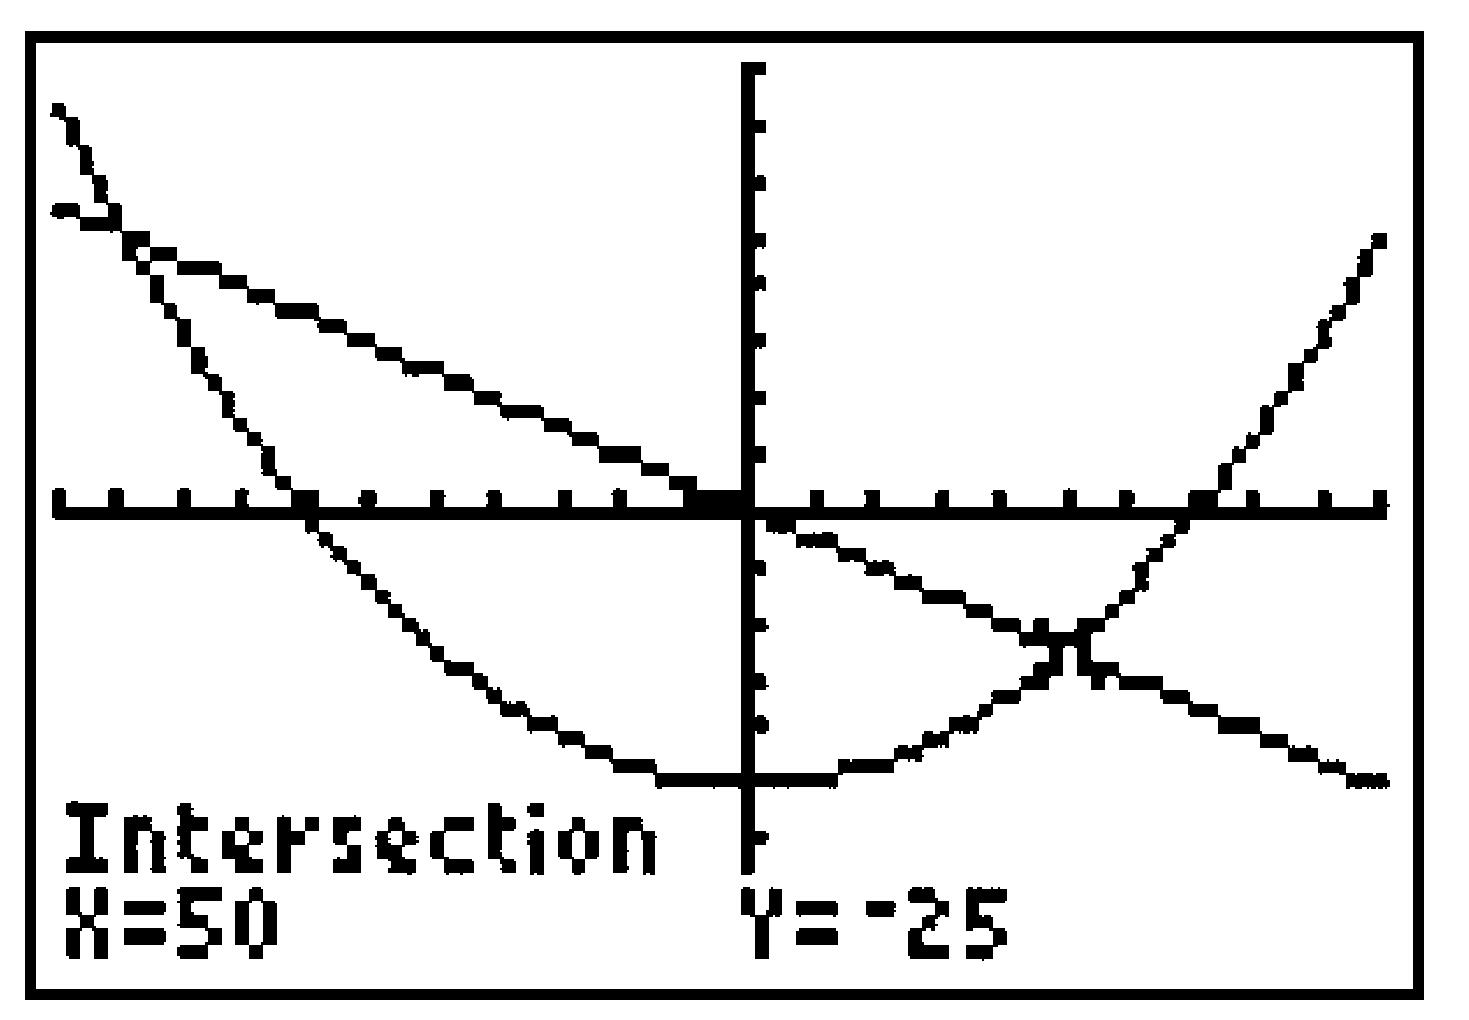 GC intersection of graphs